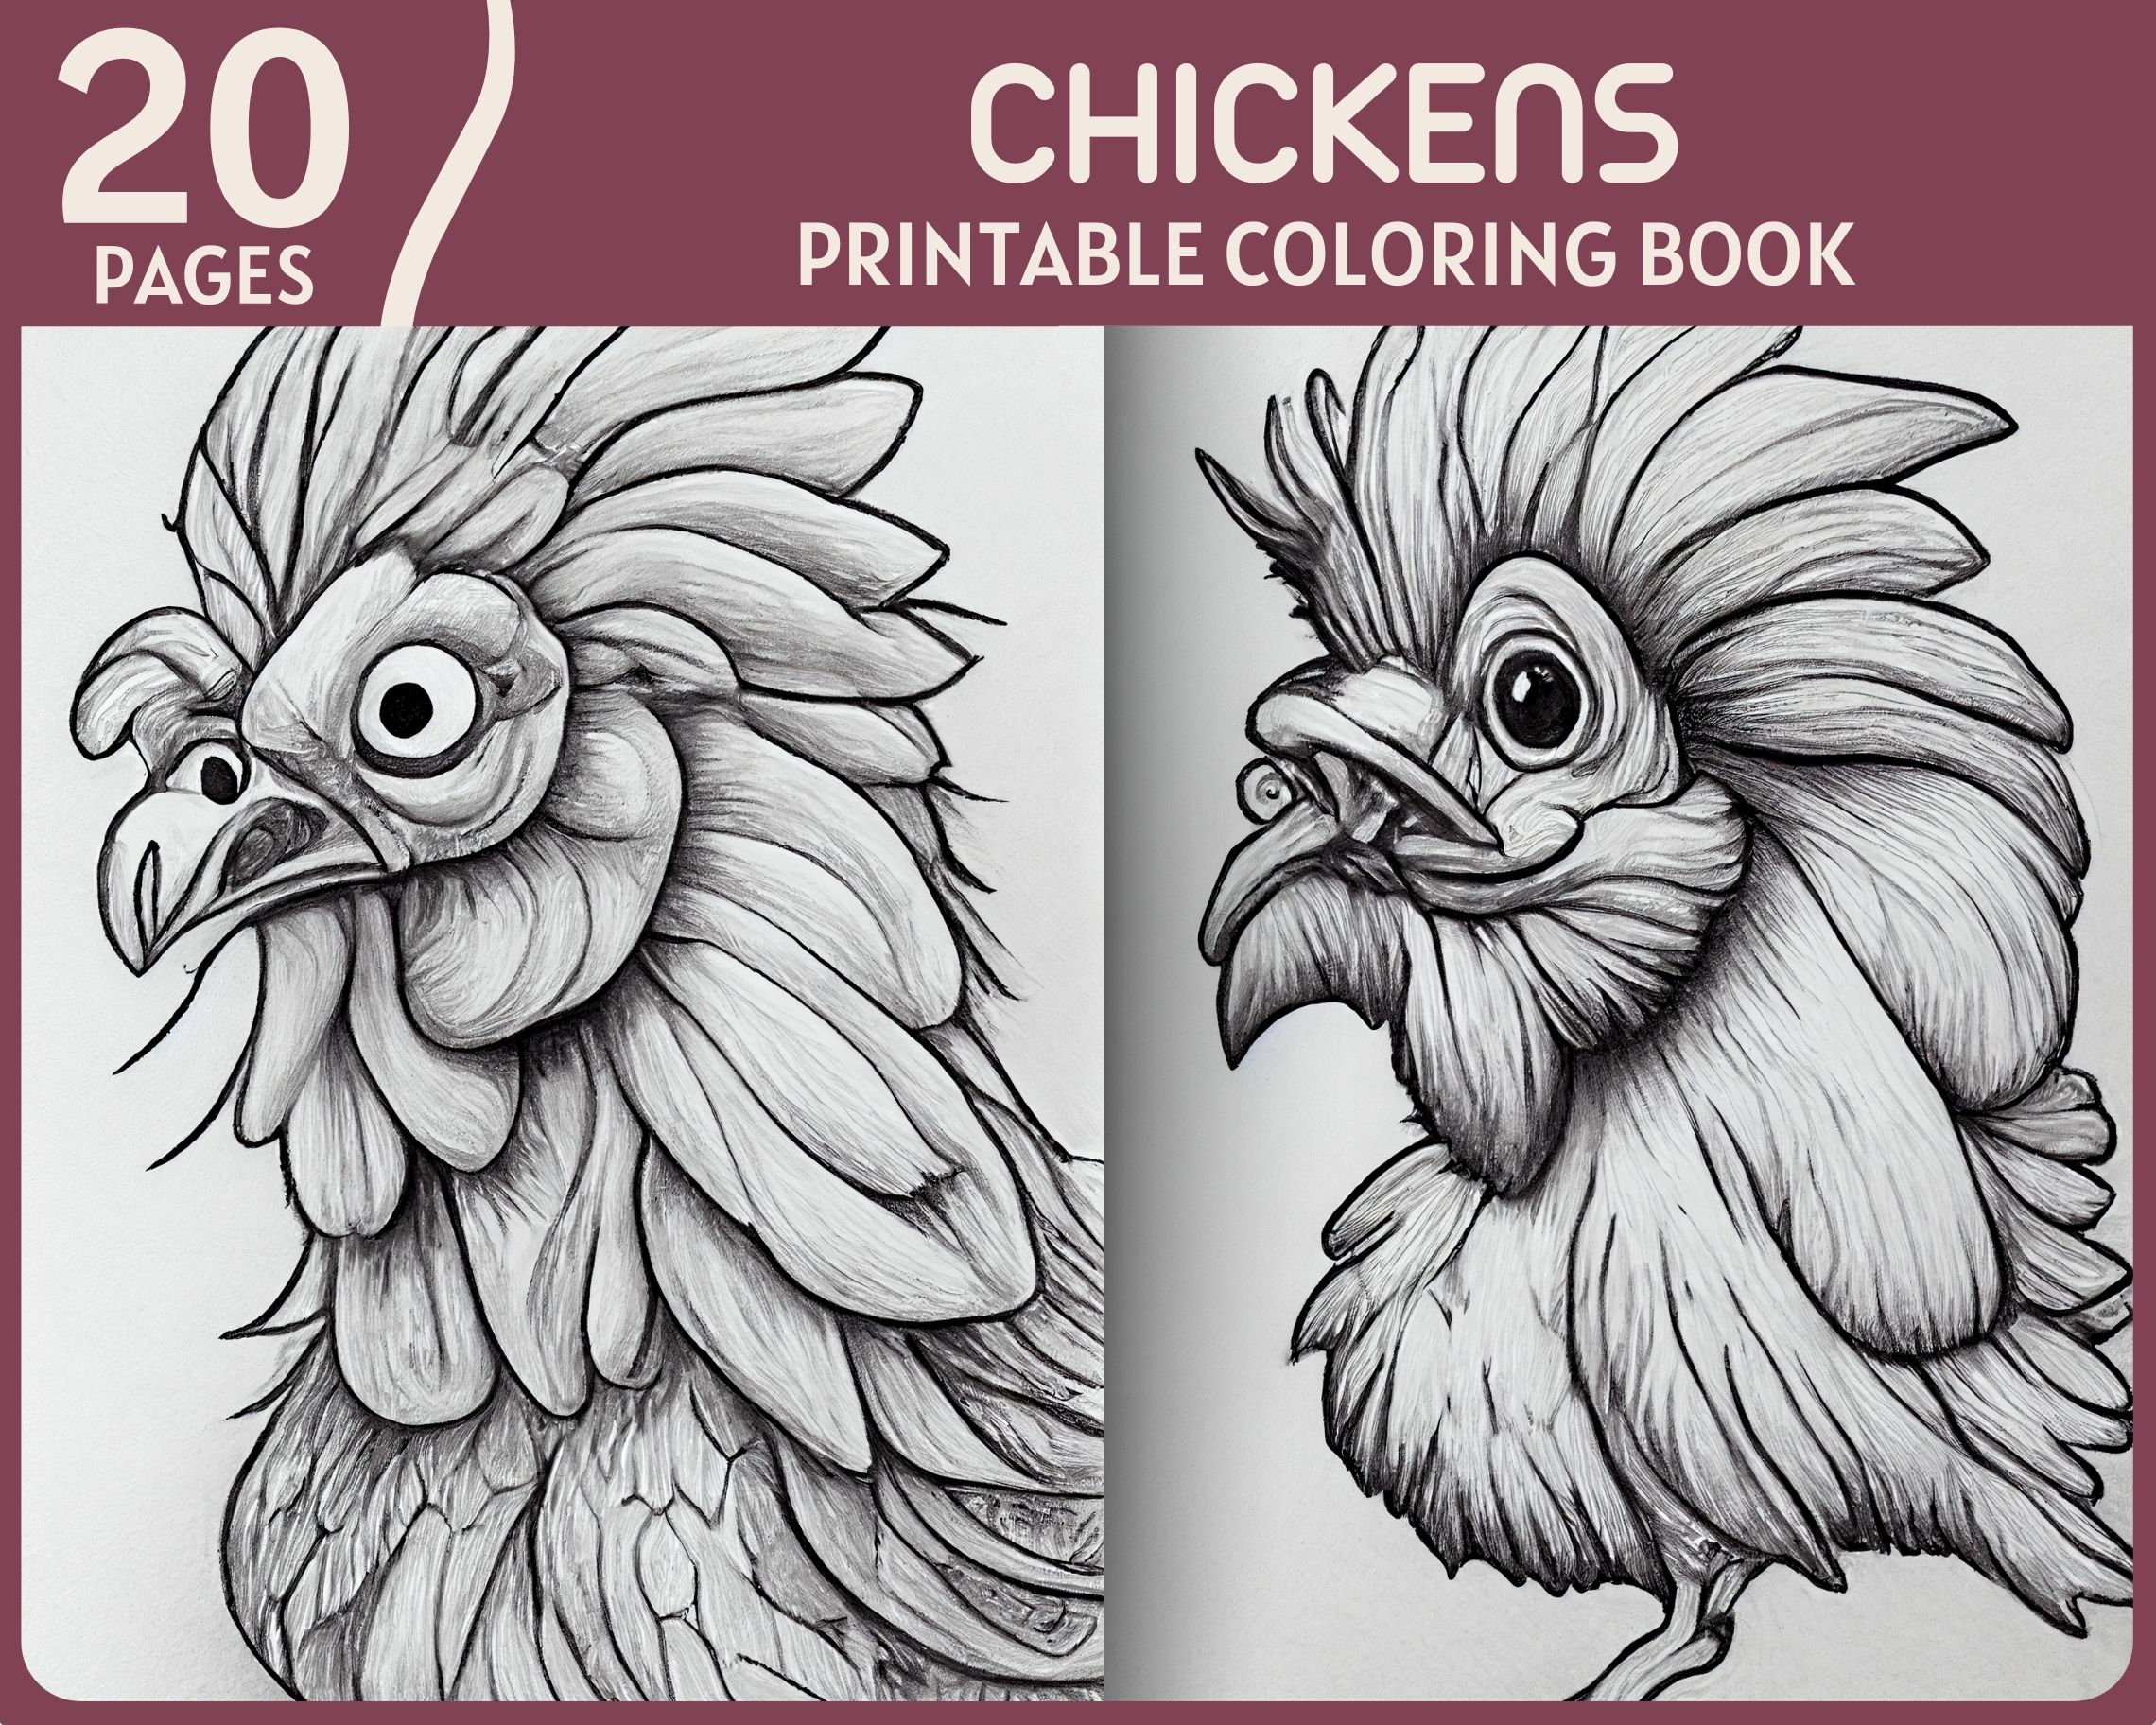 Chickens coloring pages furry crazy chicken illustrations printable coloring book